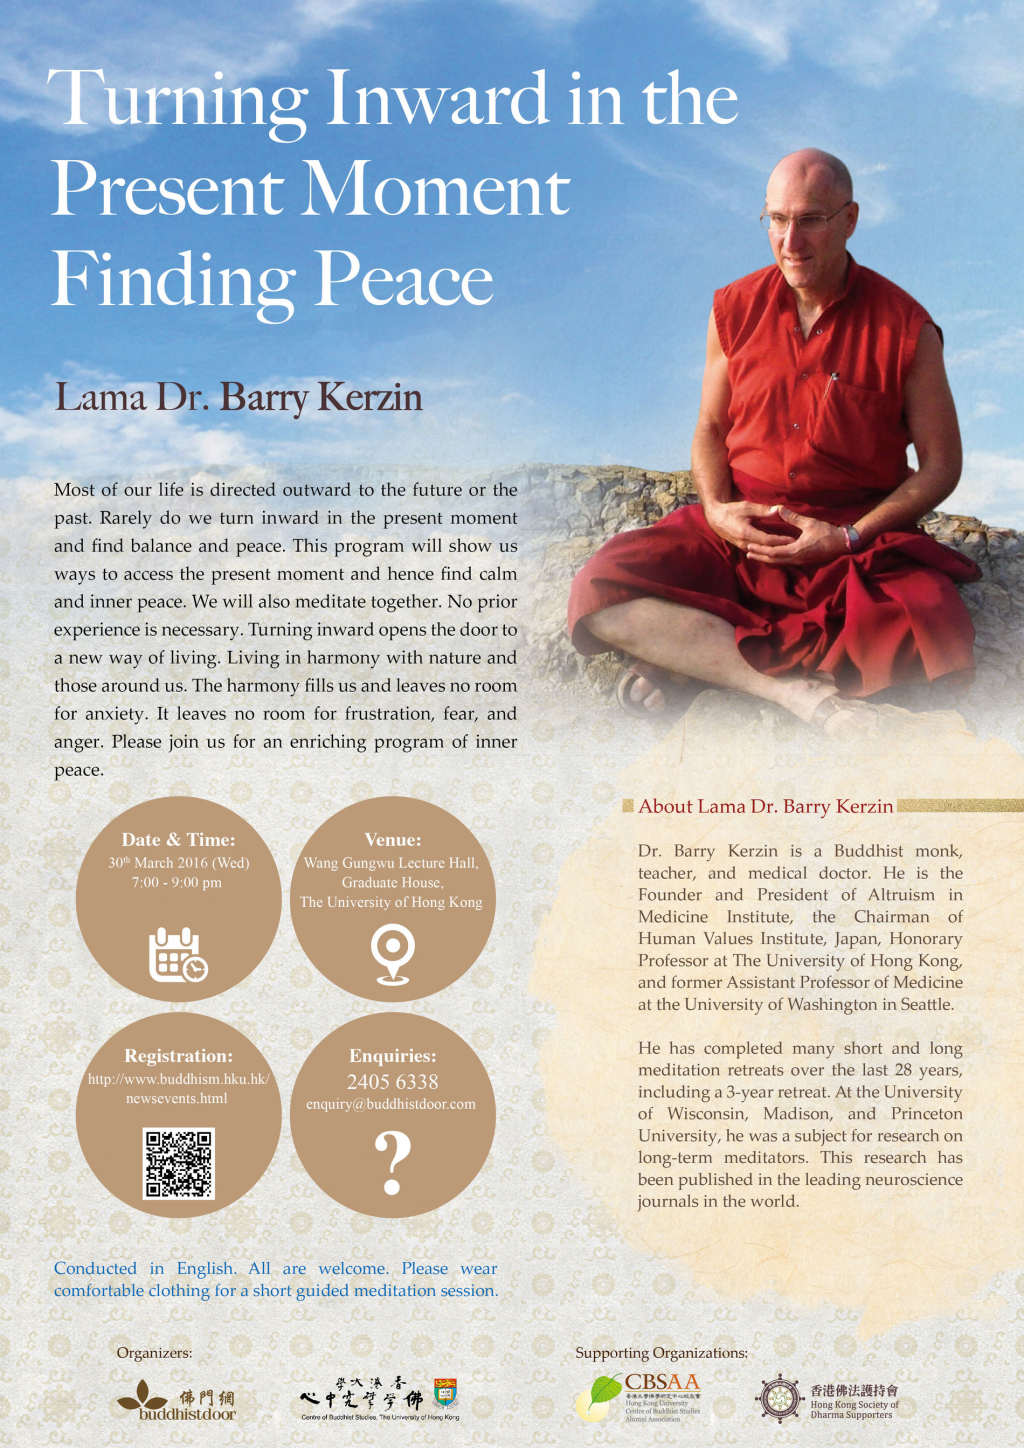 Public Talk by Lama Dr. Barry Kerzin - Turning Inward in the Present Moment Finding Peace